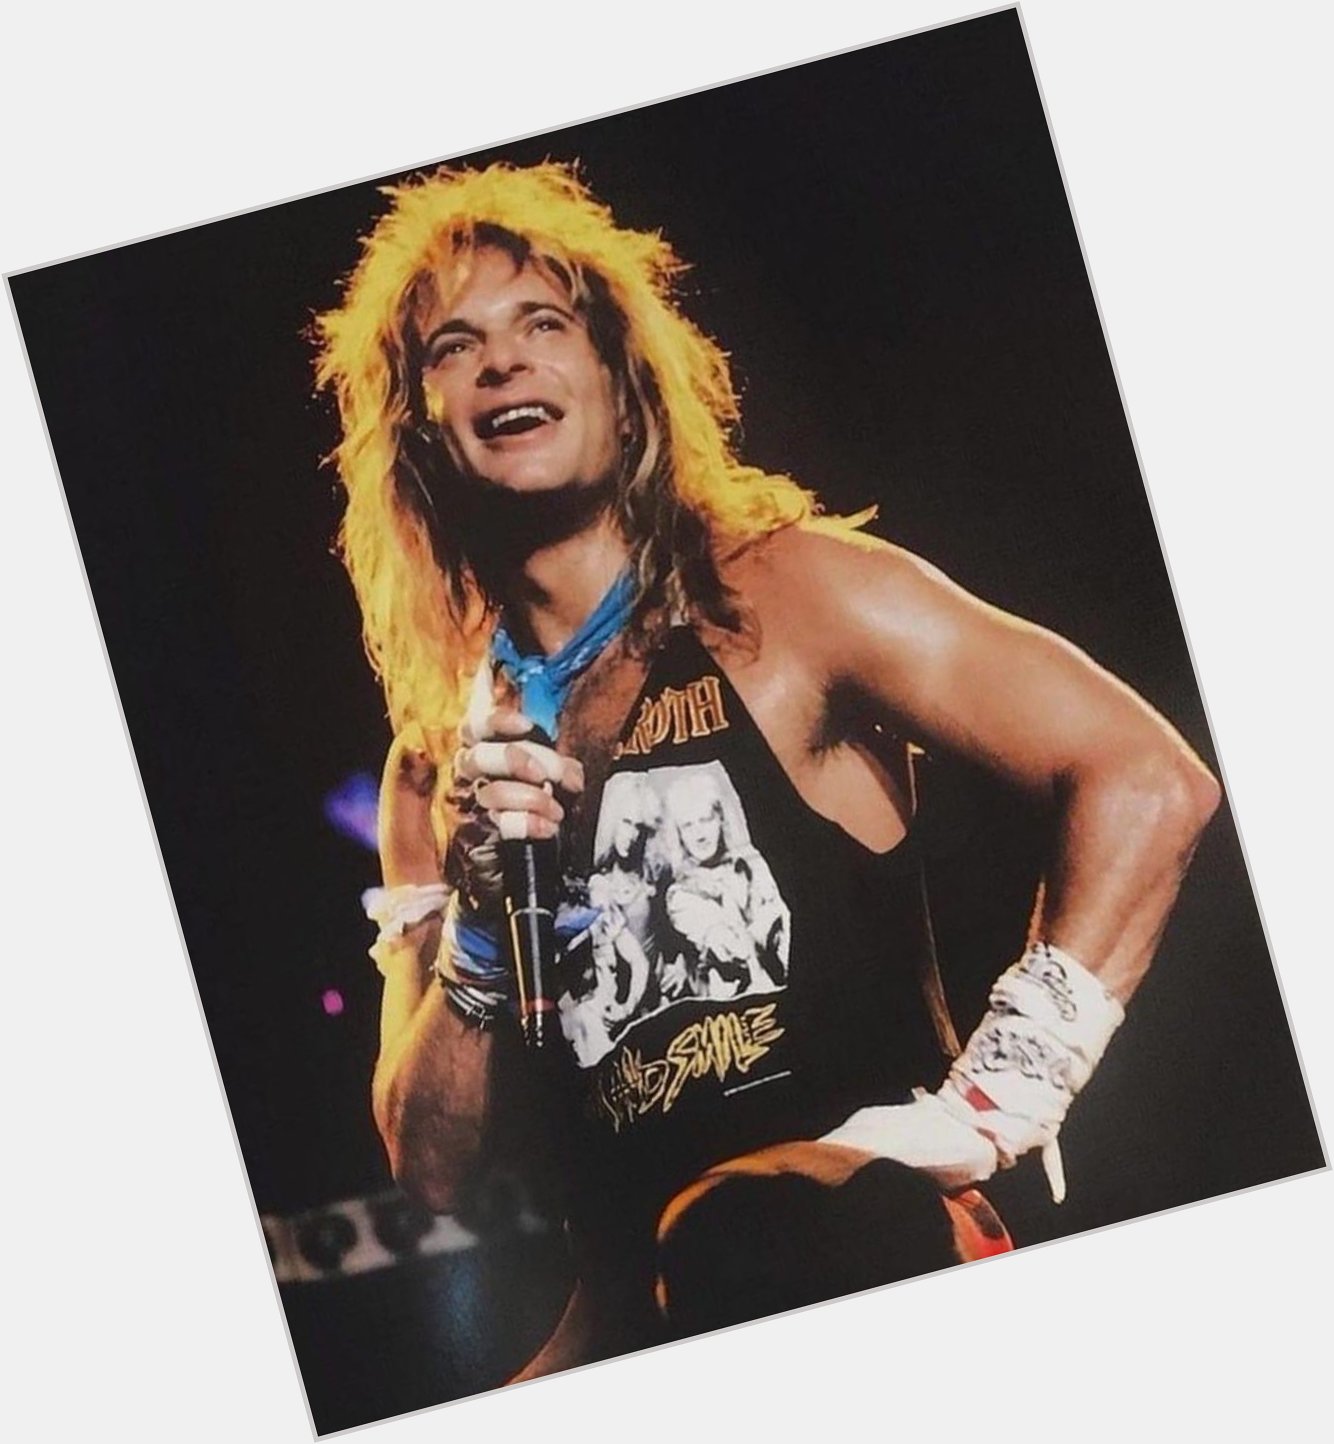 Happy birthday Diamond David Lee Roth, 68 years young.
What a showman   